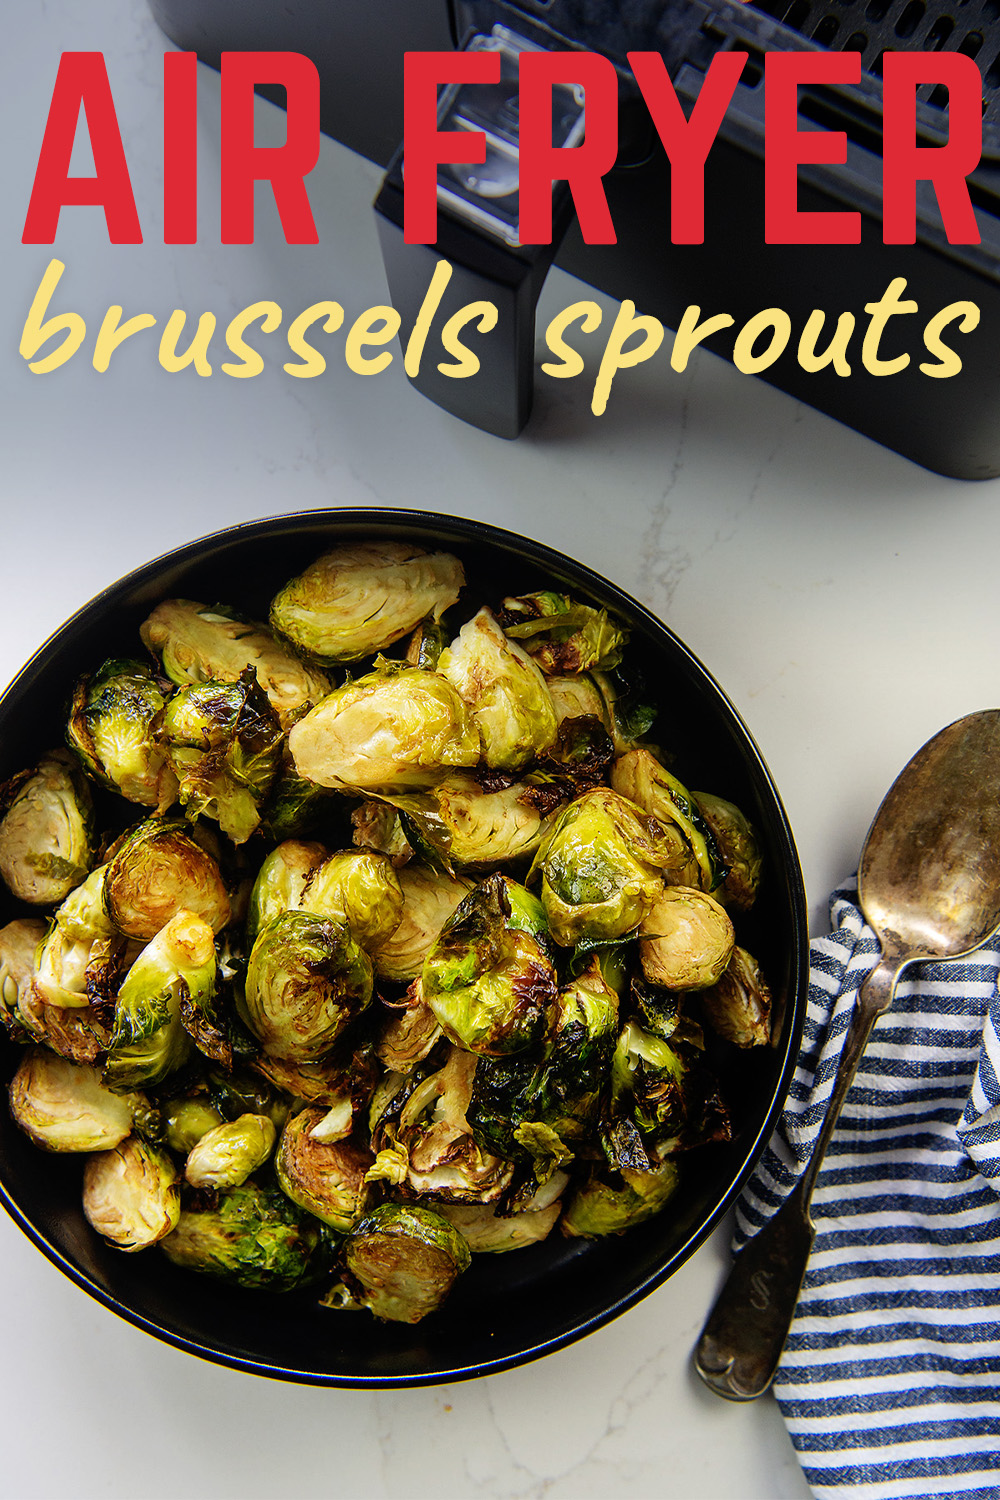 We love these healthy air fried brussels sprouts for a quick lunch or a great dinner side dish!